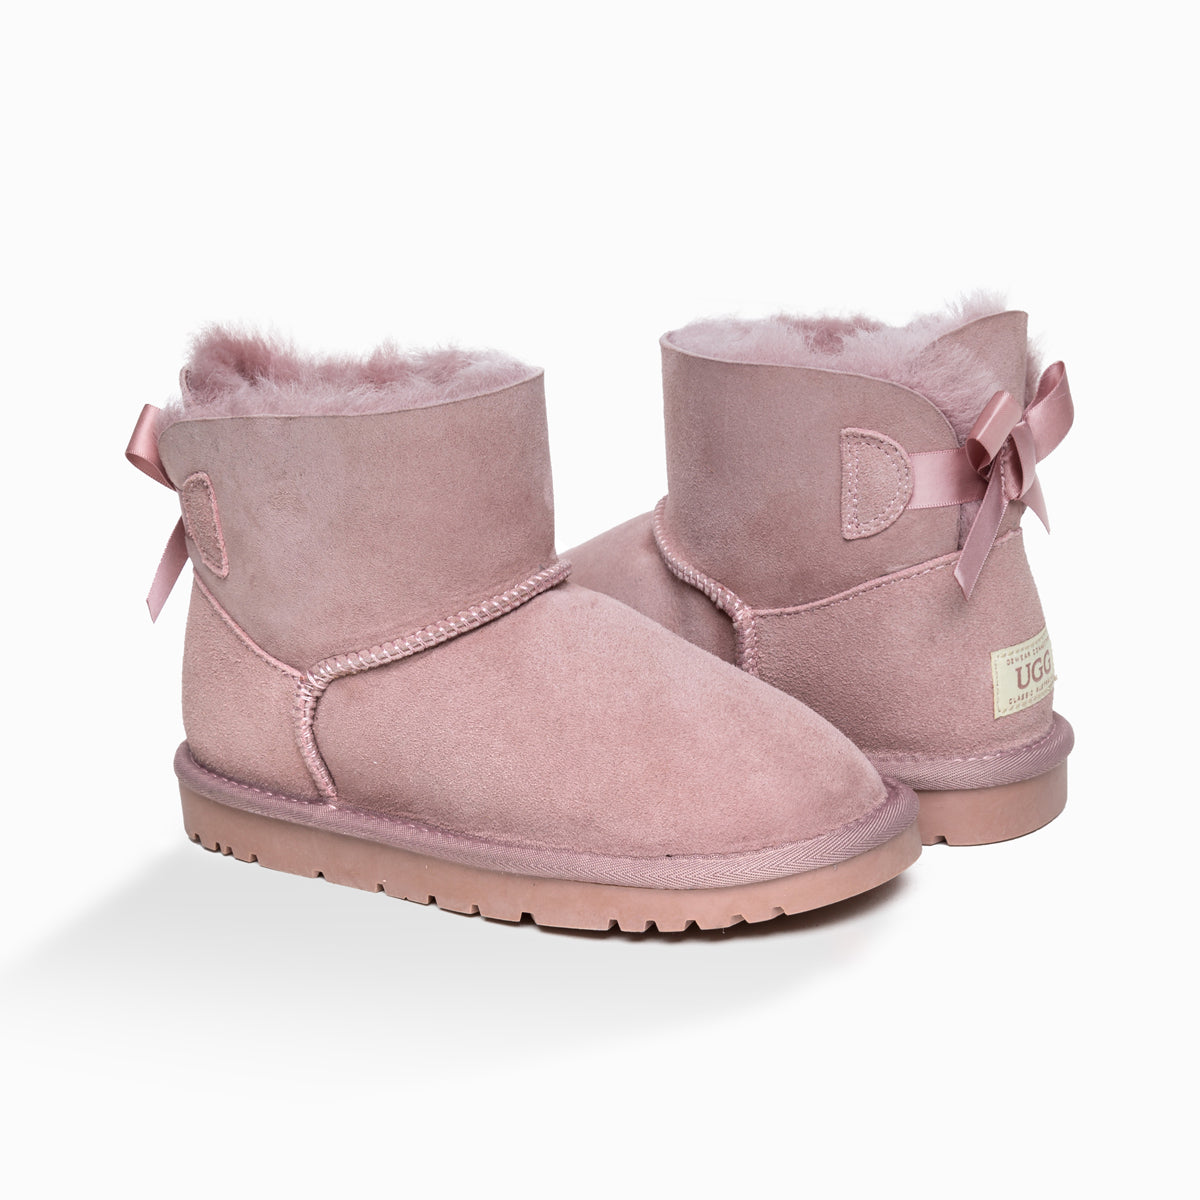 Ugg Kids Bailey Bow Boots (Water Resistant)-Kid Boots-PEROZ Accessories